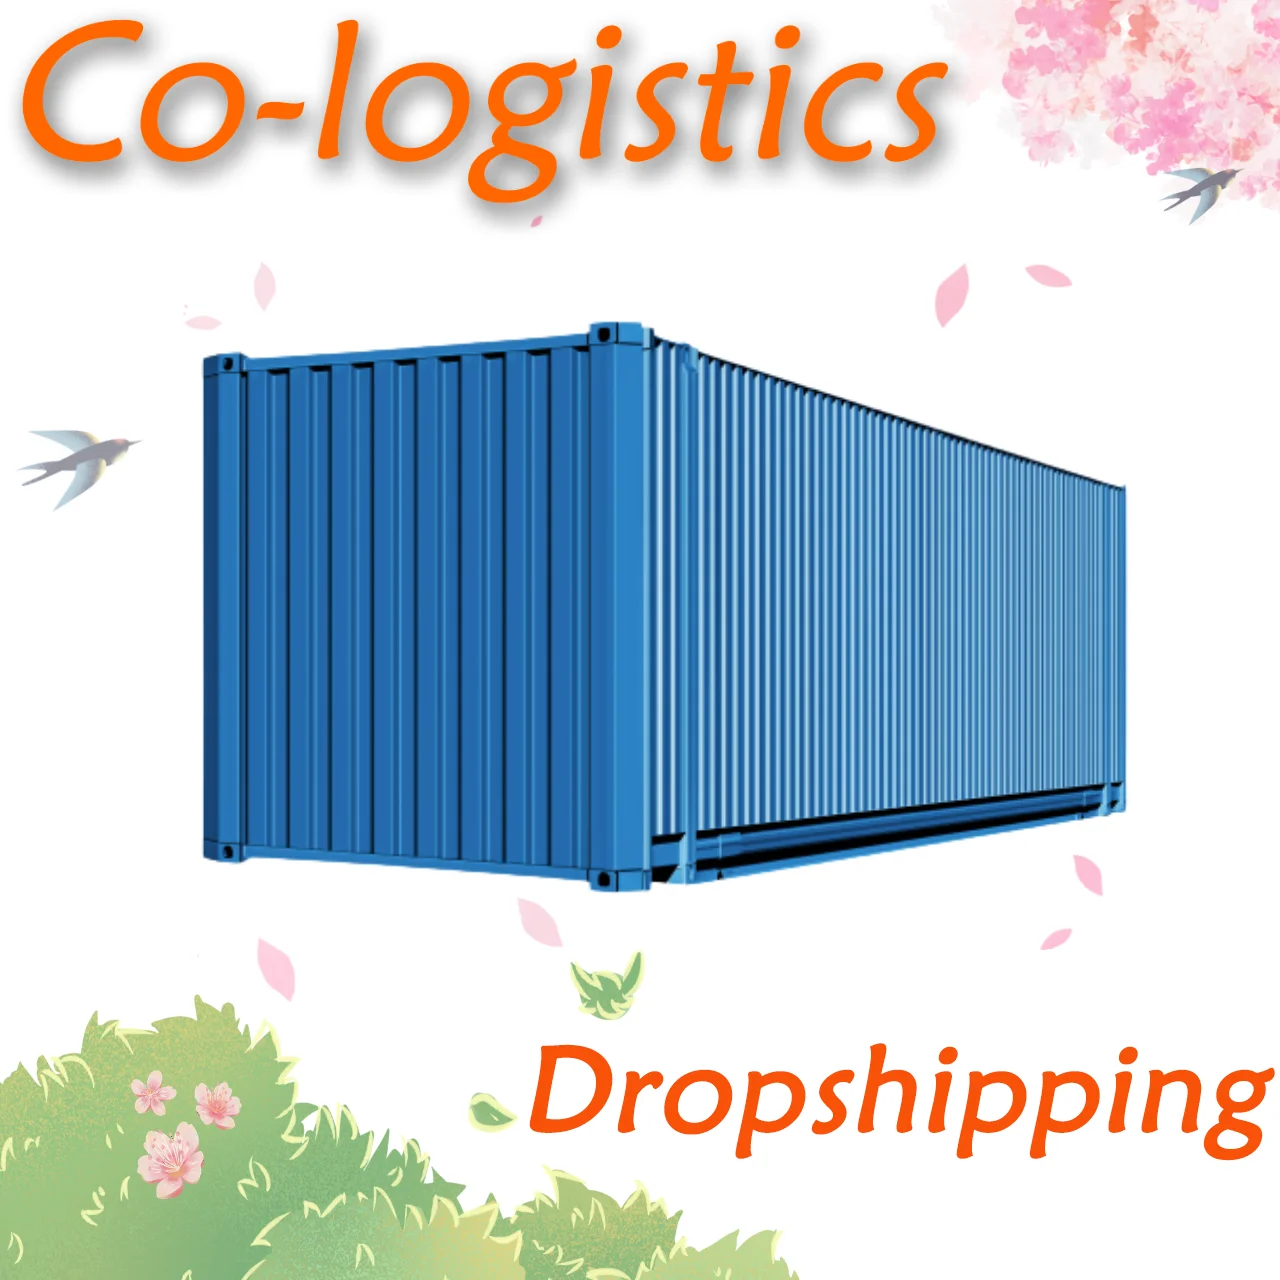 FCL rail container agent cargo DDP20GP 40HQ  from China to Europe shipping agent logistics service (1600469702176)